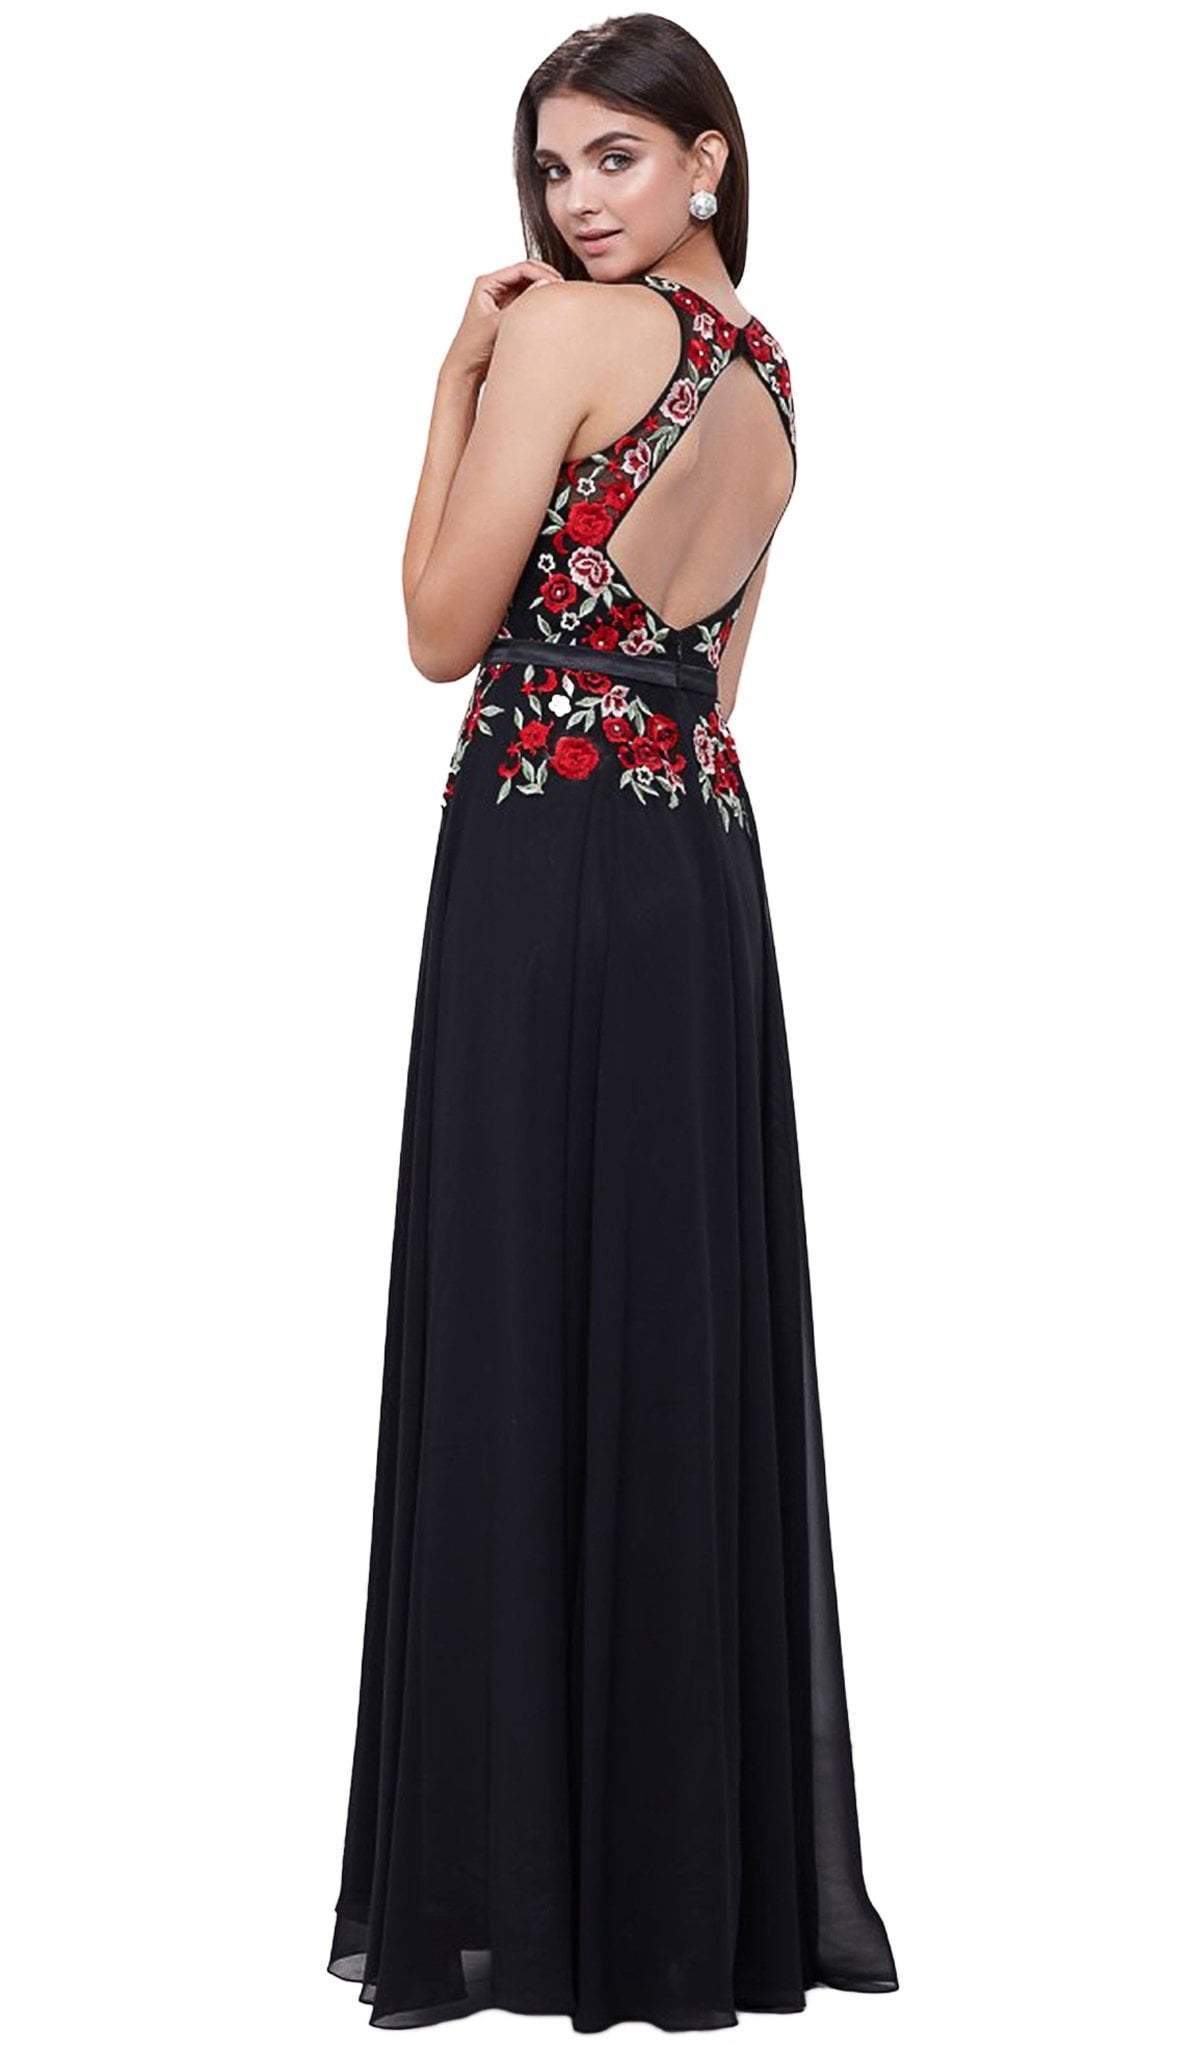 Nox Anabel - 8275 Floral Embroidered A-line Dress Special Occasion Dress